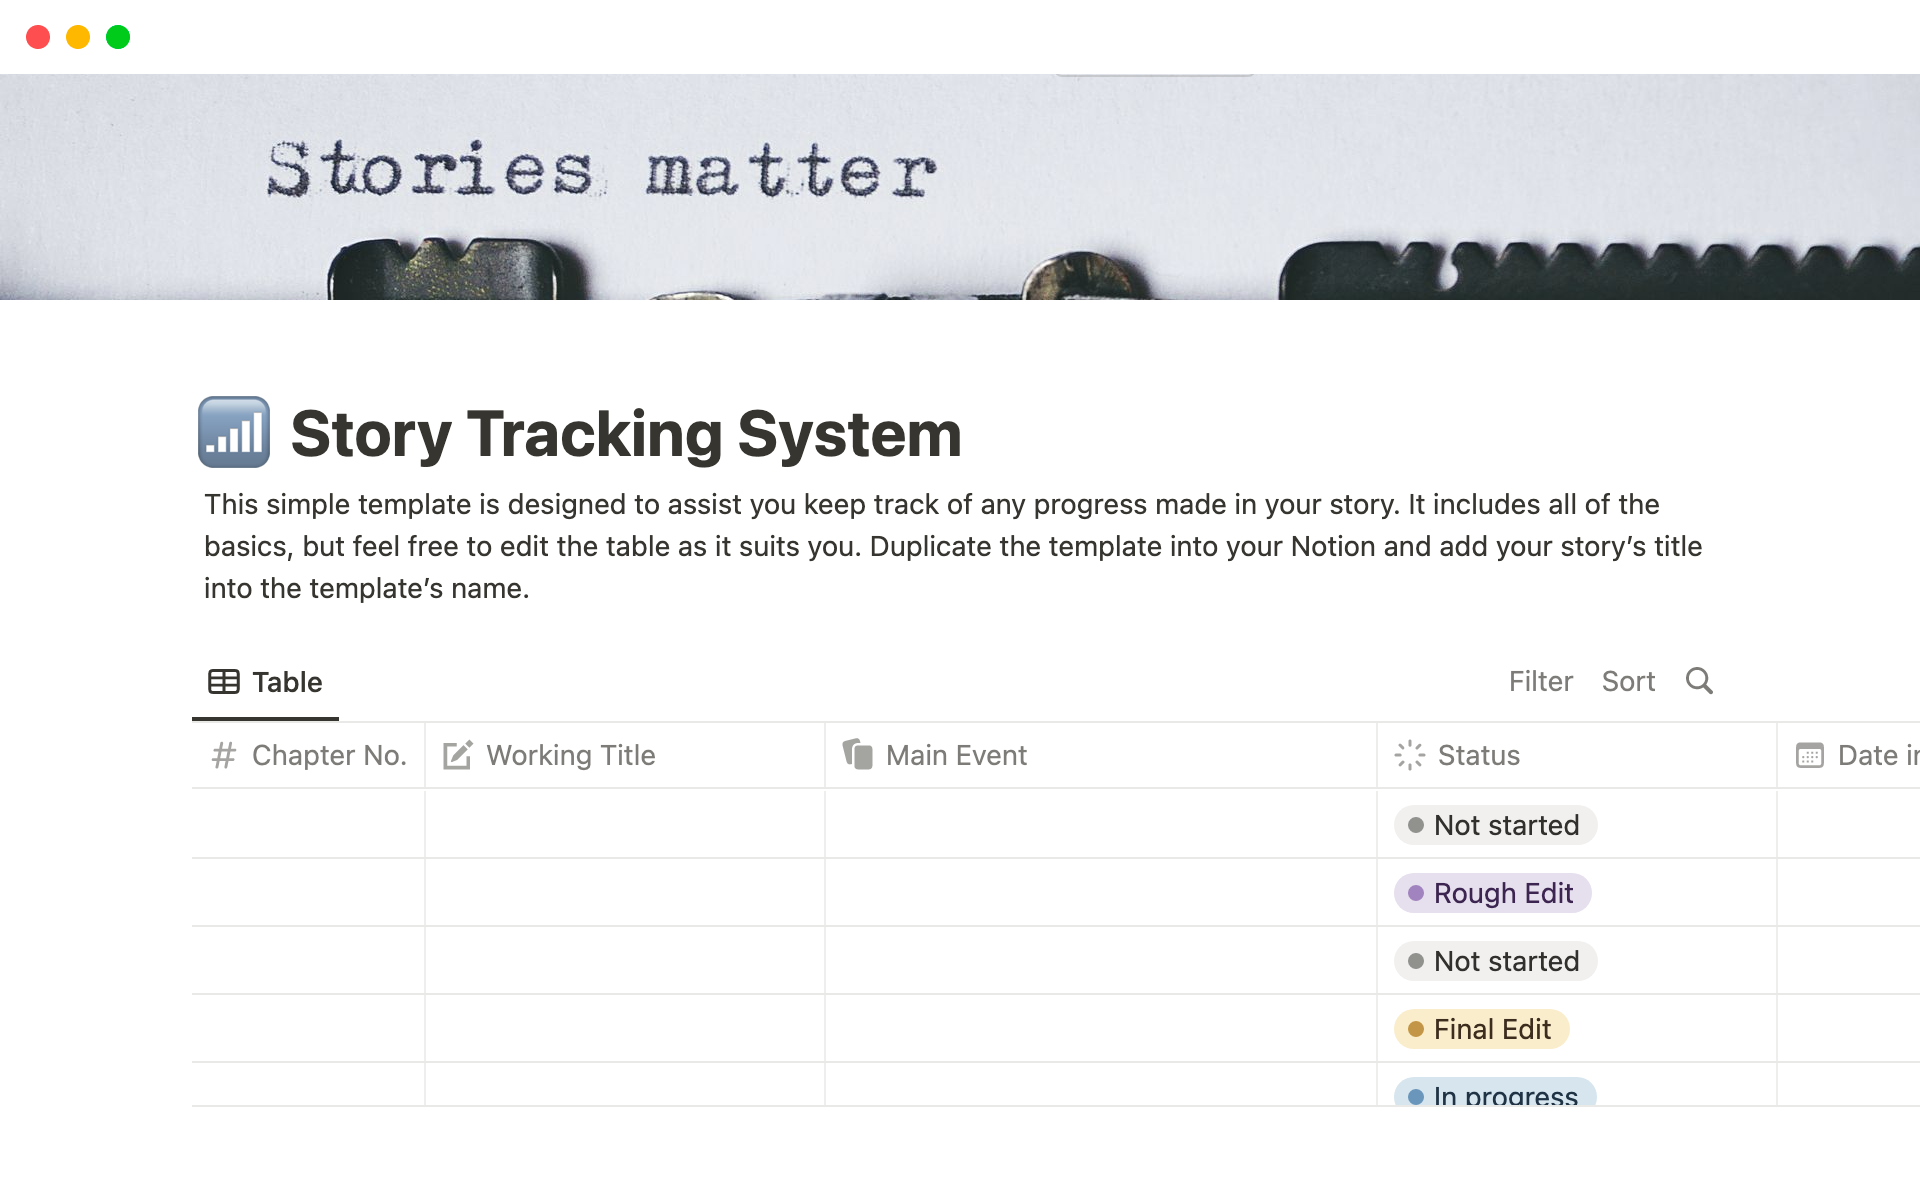 This template is designed to assist authors track progress made in their story